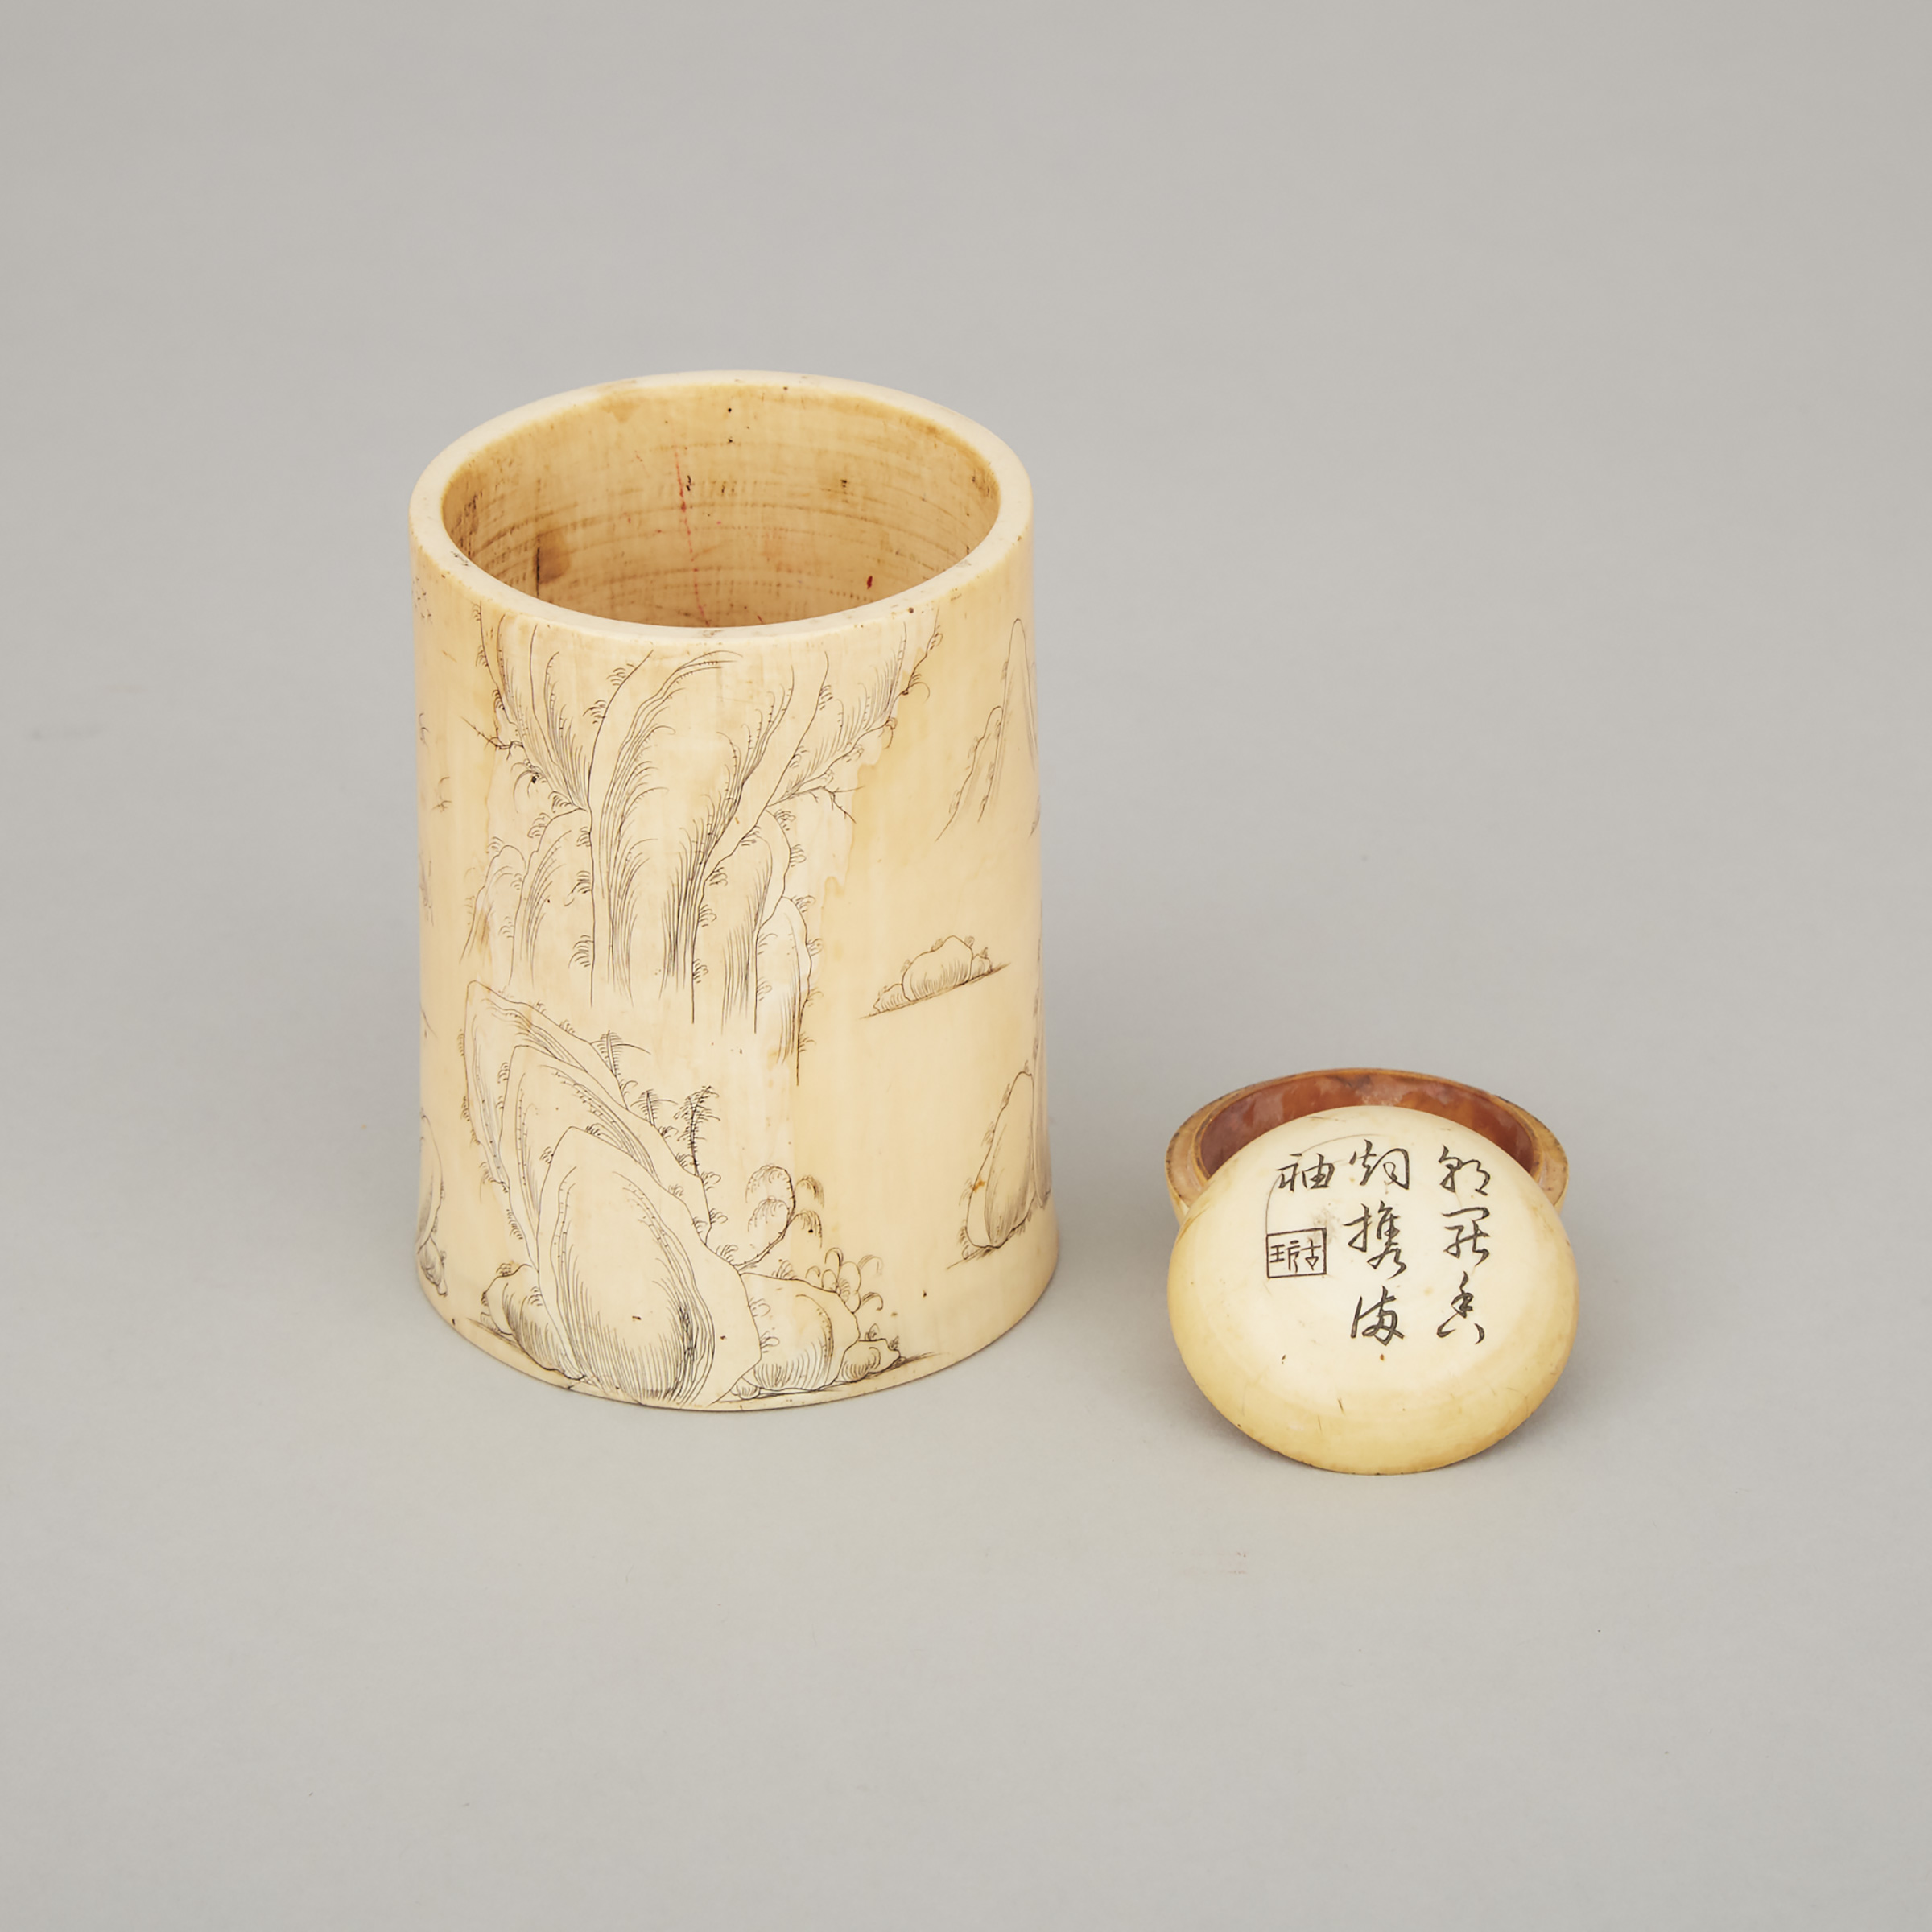 Two Chinese Ivory Carved Scholar's Objects, Qing Dynasty/Republic Period